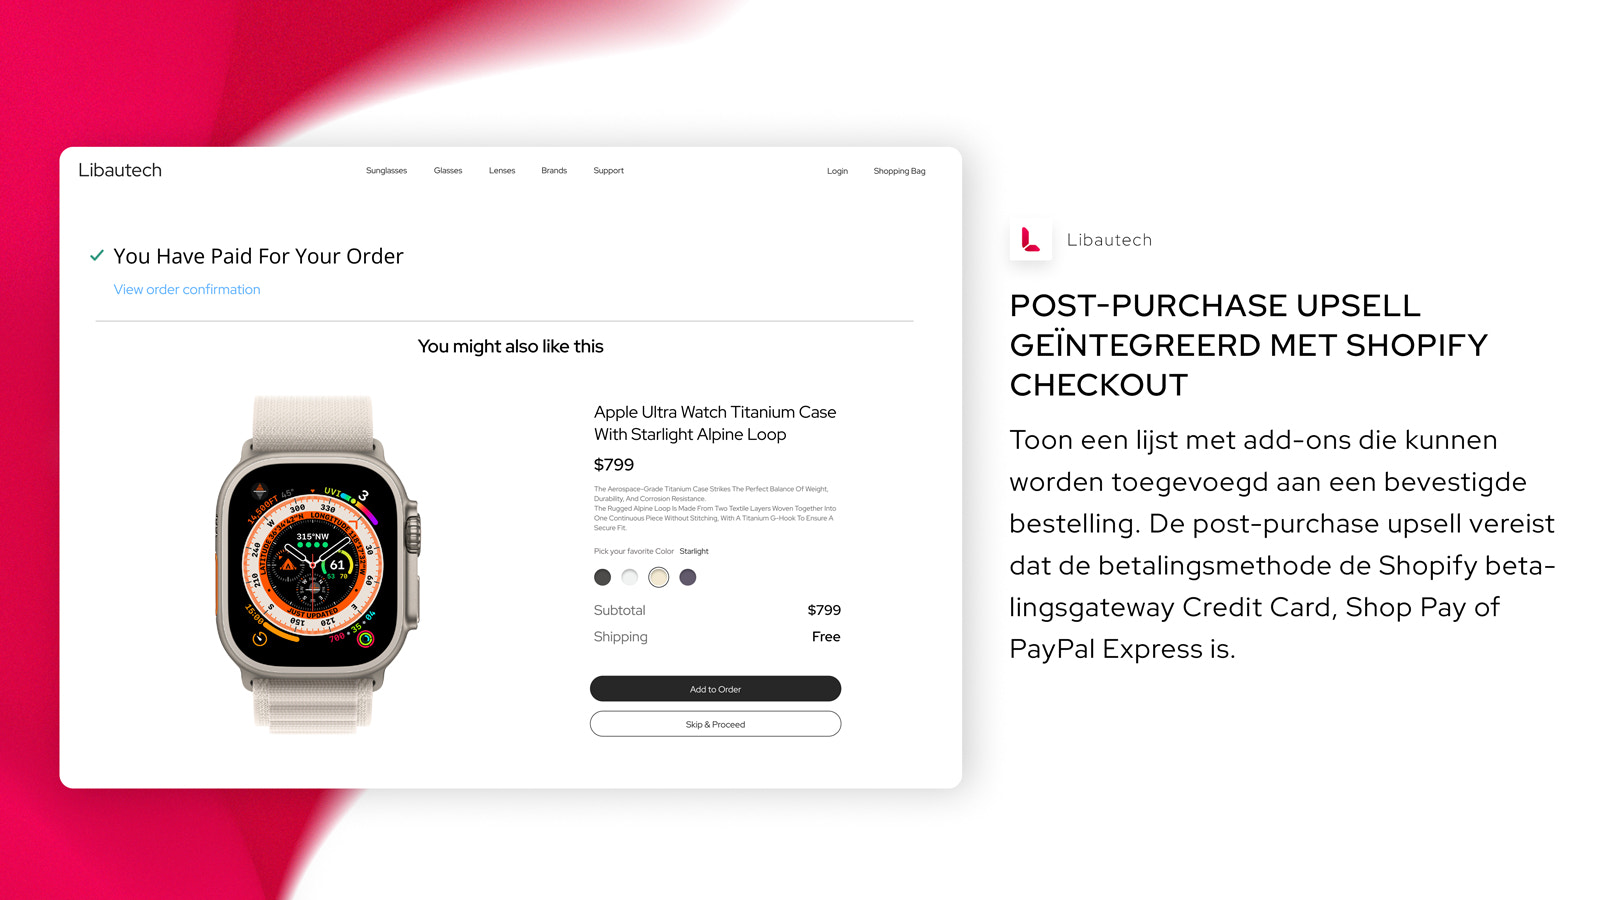 Post-purchase Upsell geïntegreerd met Shopify Checkout